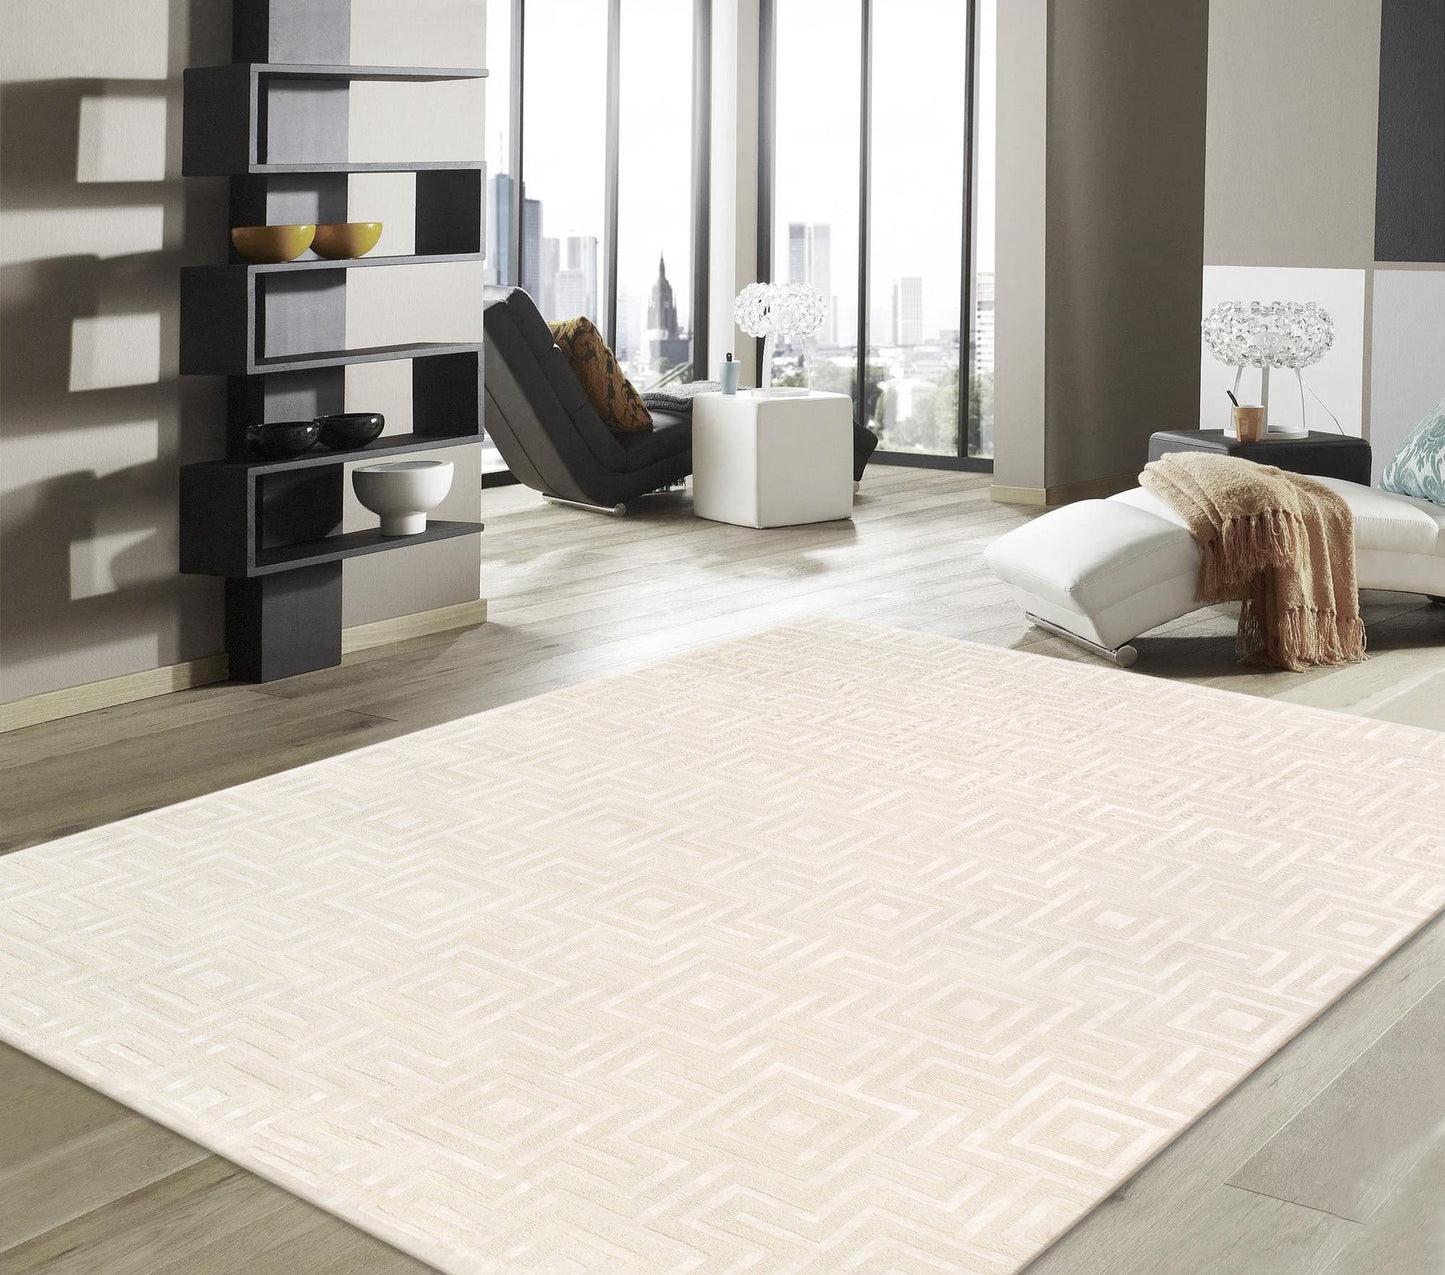 Edgy Collection Hand-Tufted Ivory BSilk & Wool Area Rug- 8' 9" X 11' 9"